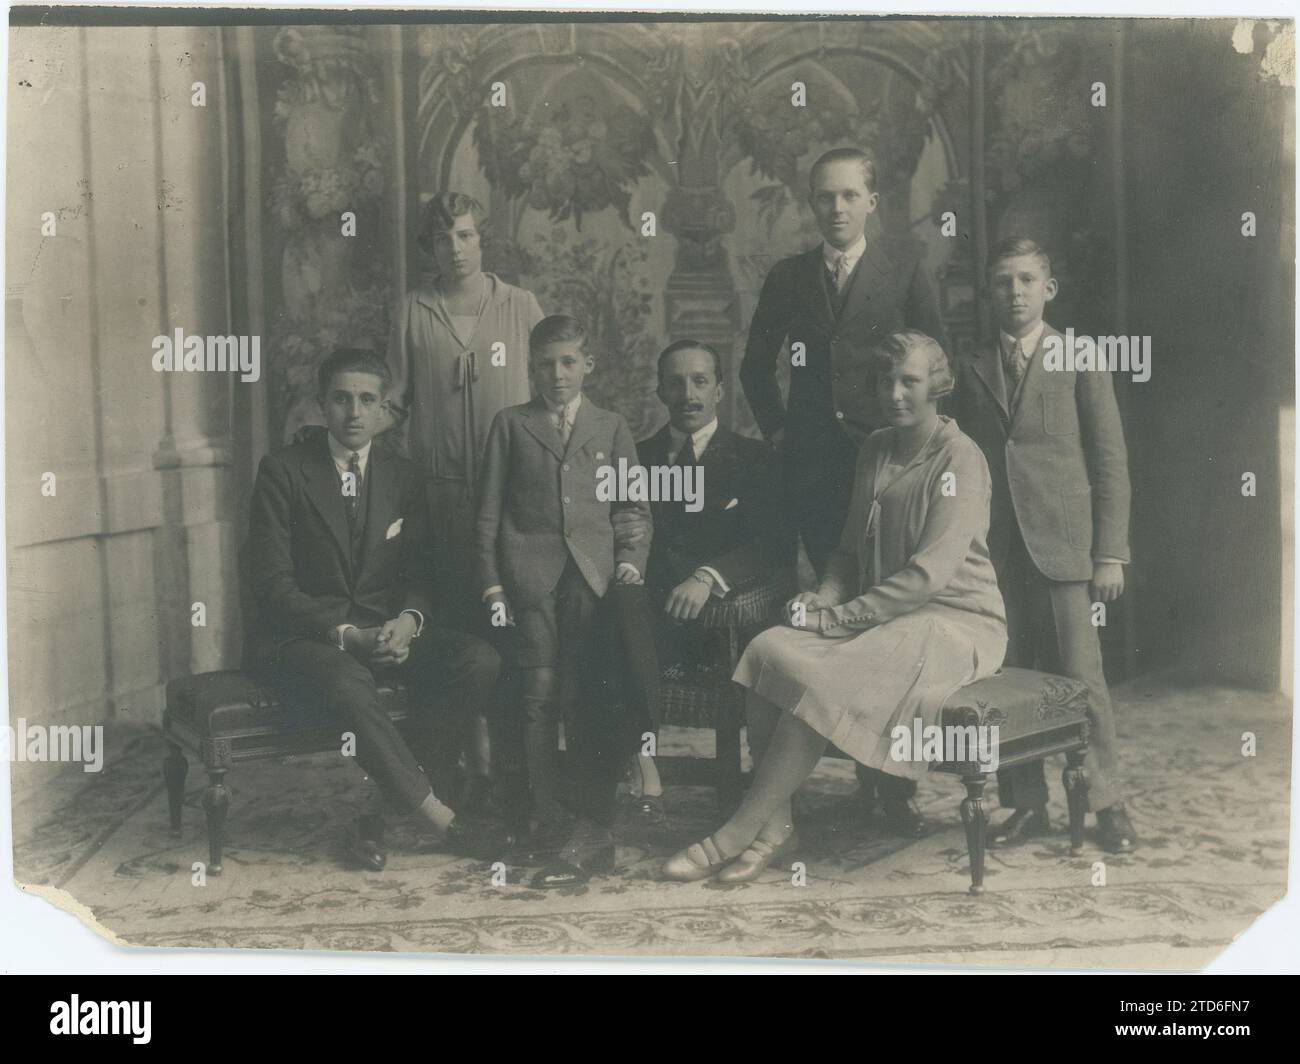 Santander, 12/25/1922. The King surrounded by his children. From left to right, the Infantes Don Jaime, Doña Beatriz and Don Gonzalo; the Prince of Asturias Don Alfonso; Doña Cristina and Don Juan. Credit: Album / Archivo ABC / Kaulak Stock Photo